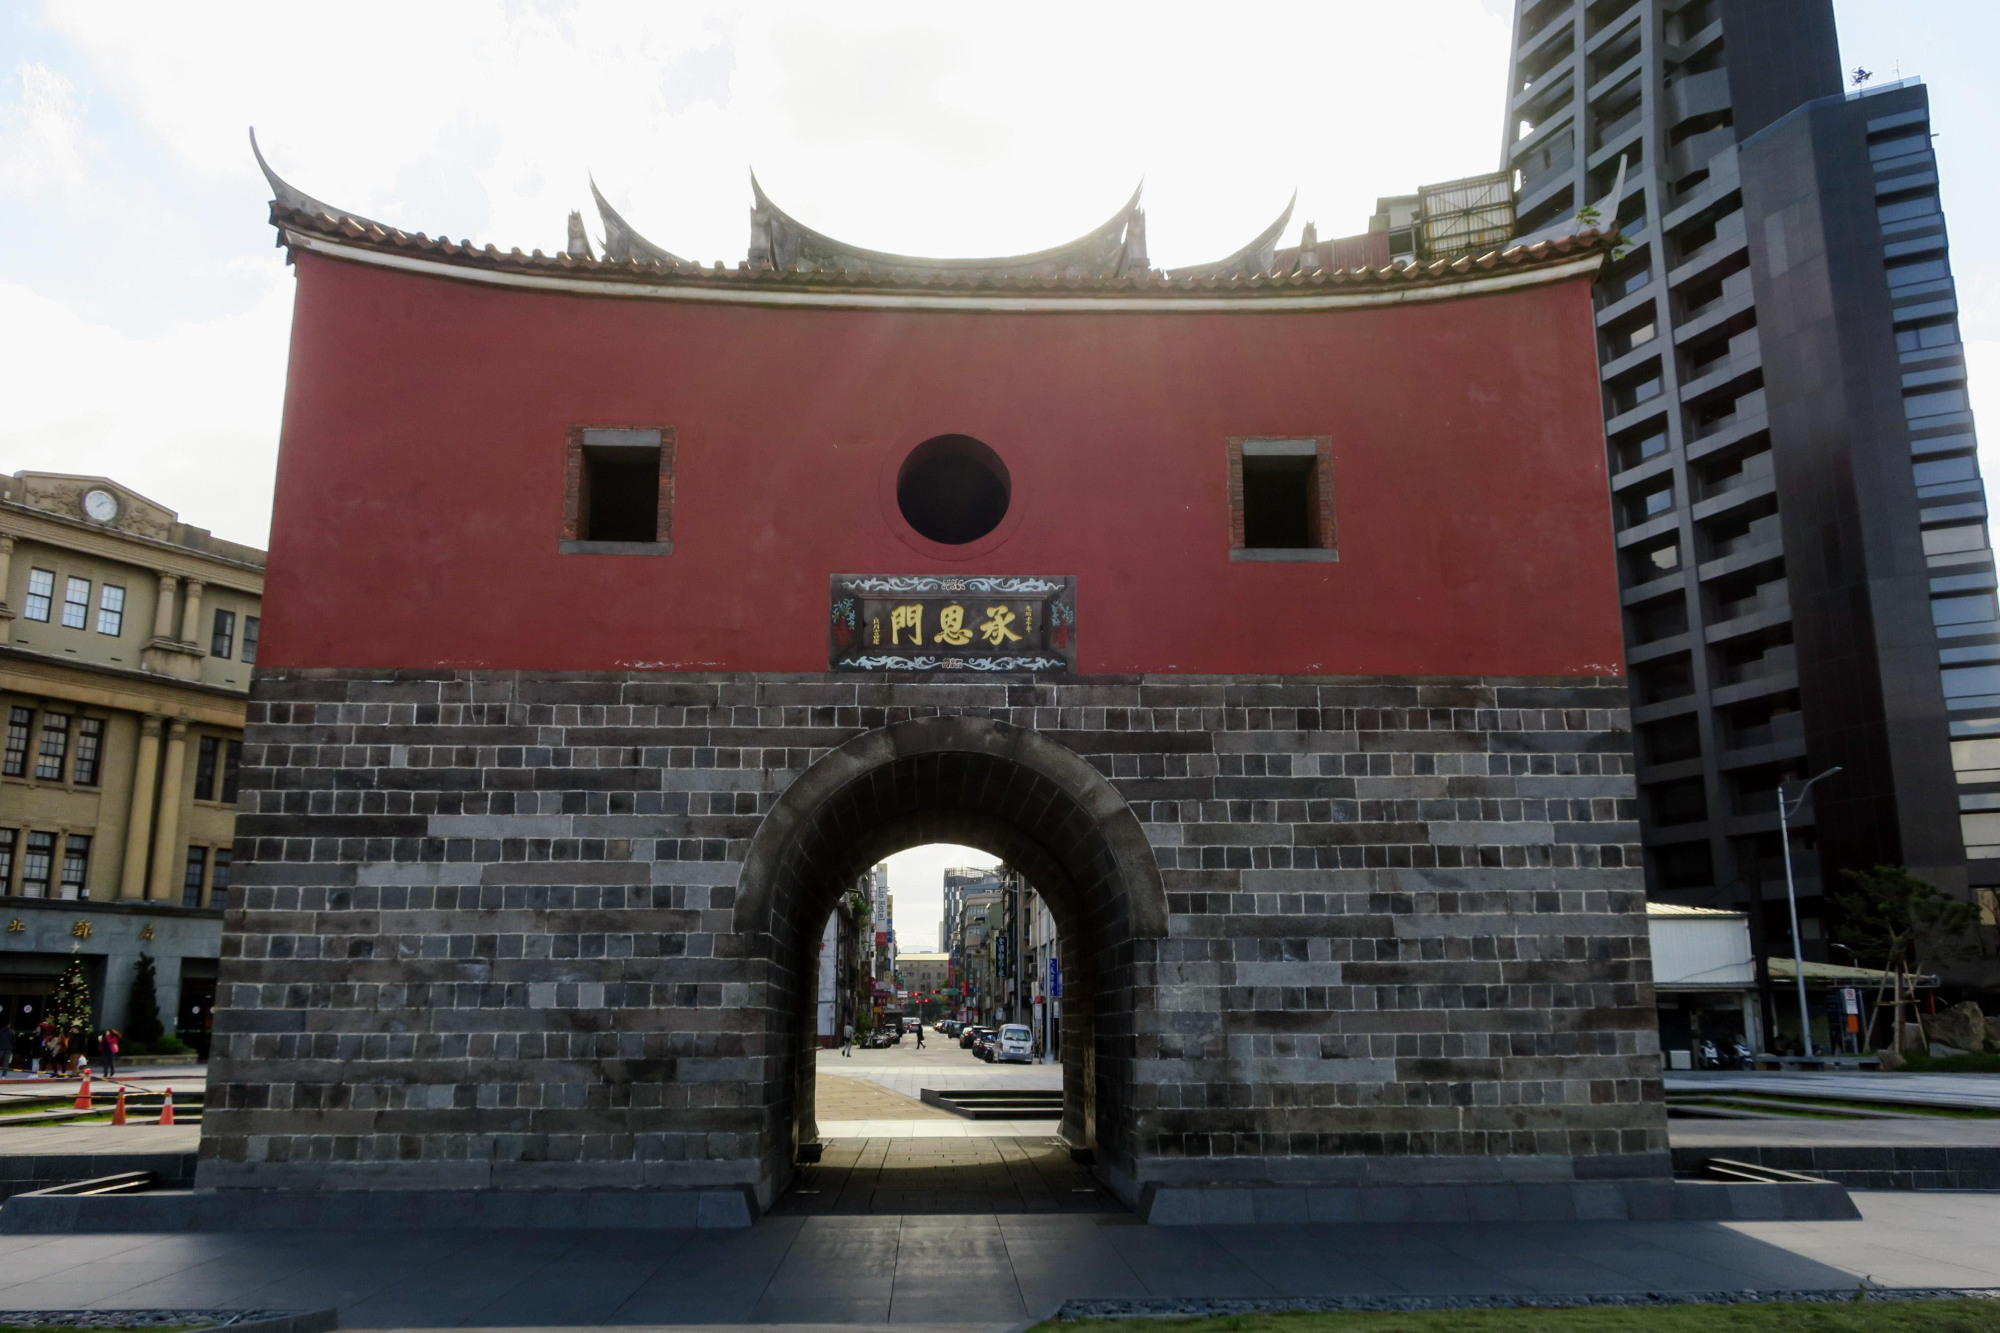 The North Gate in Taipei is seen on Dec. 20, 2017, near the century-old Taipei Beimen (North Gate) Post Office (left). | KYODO